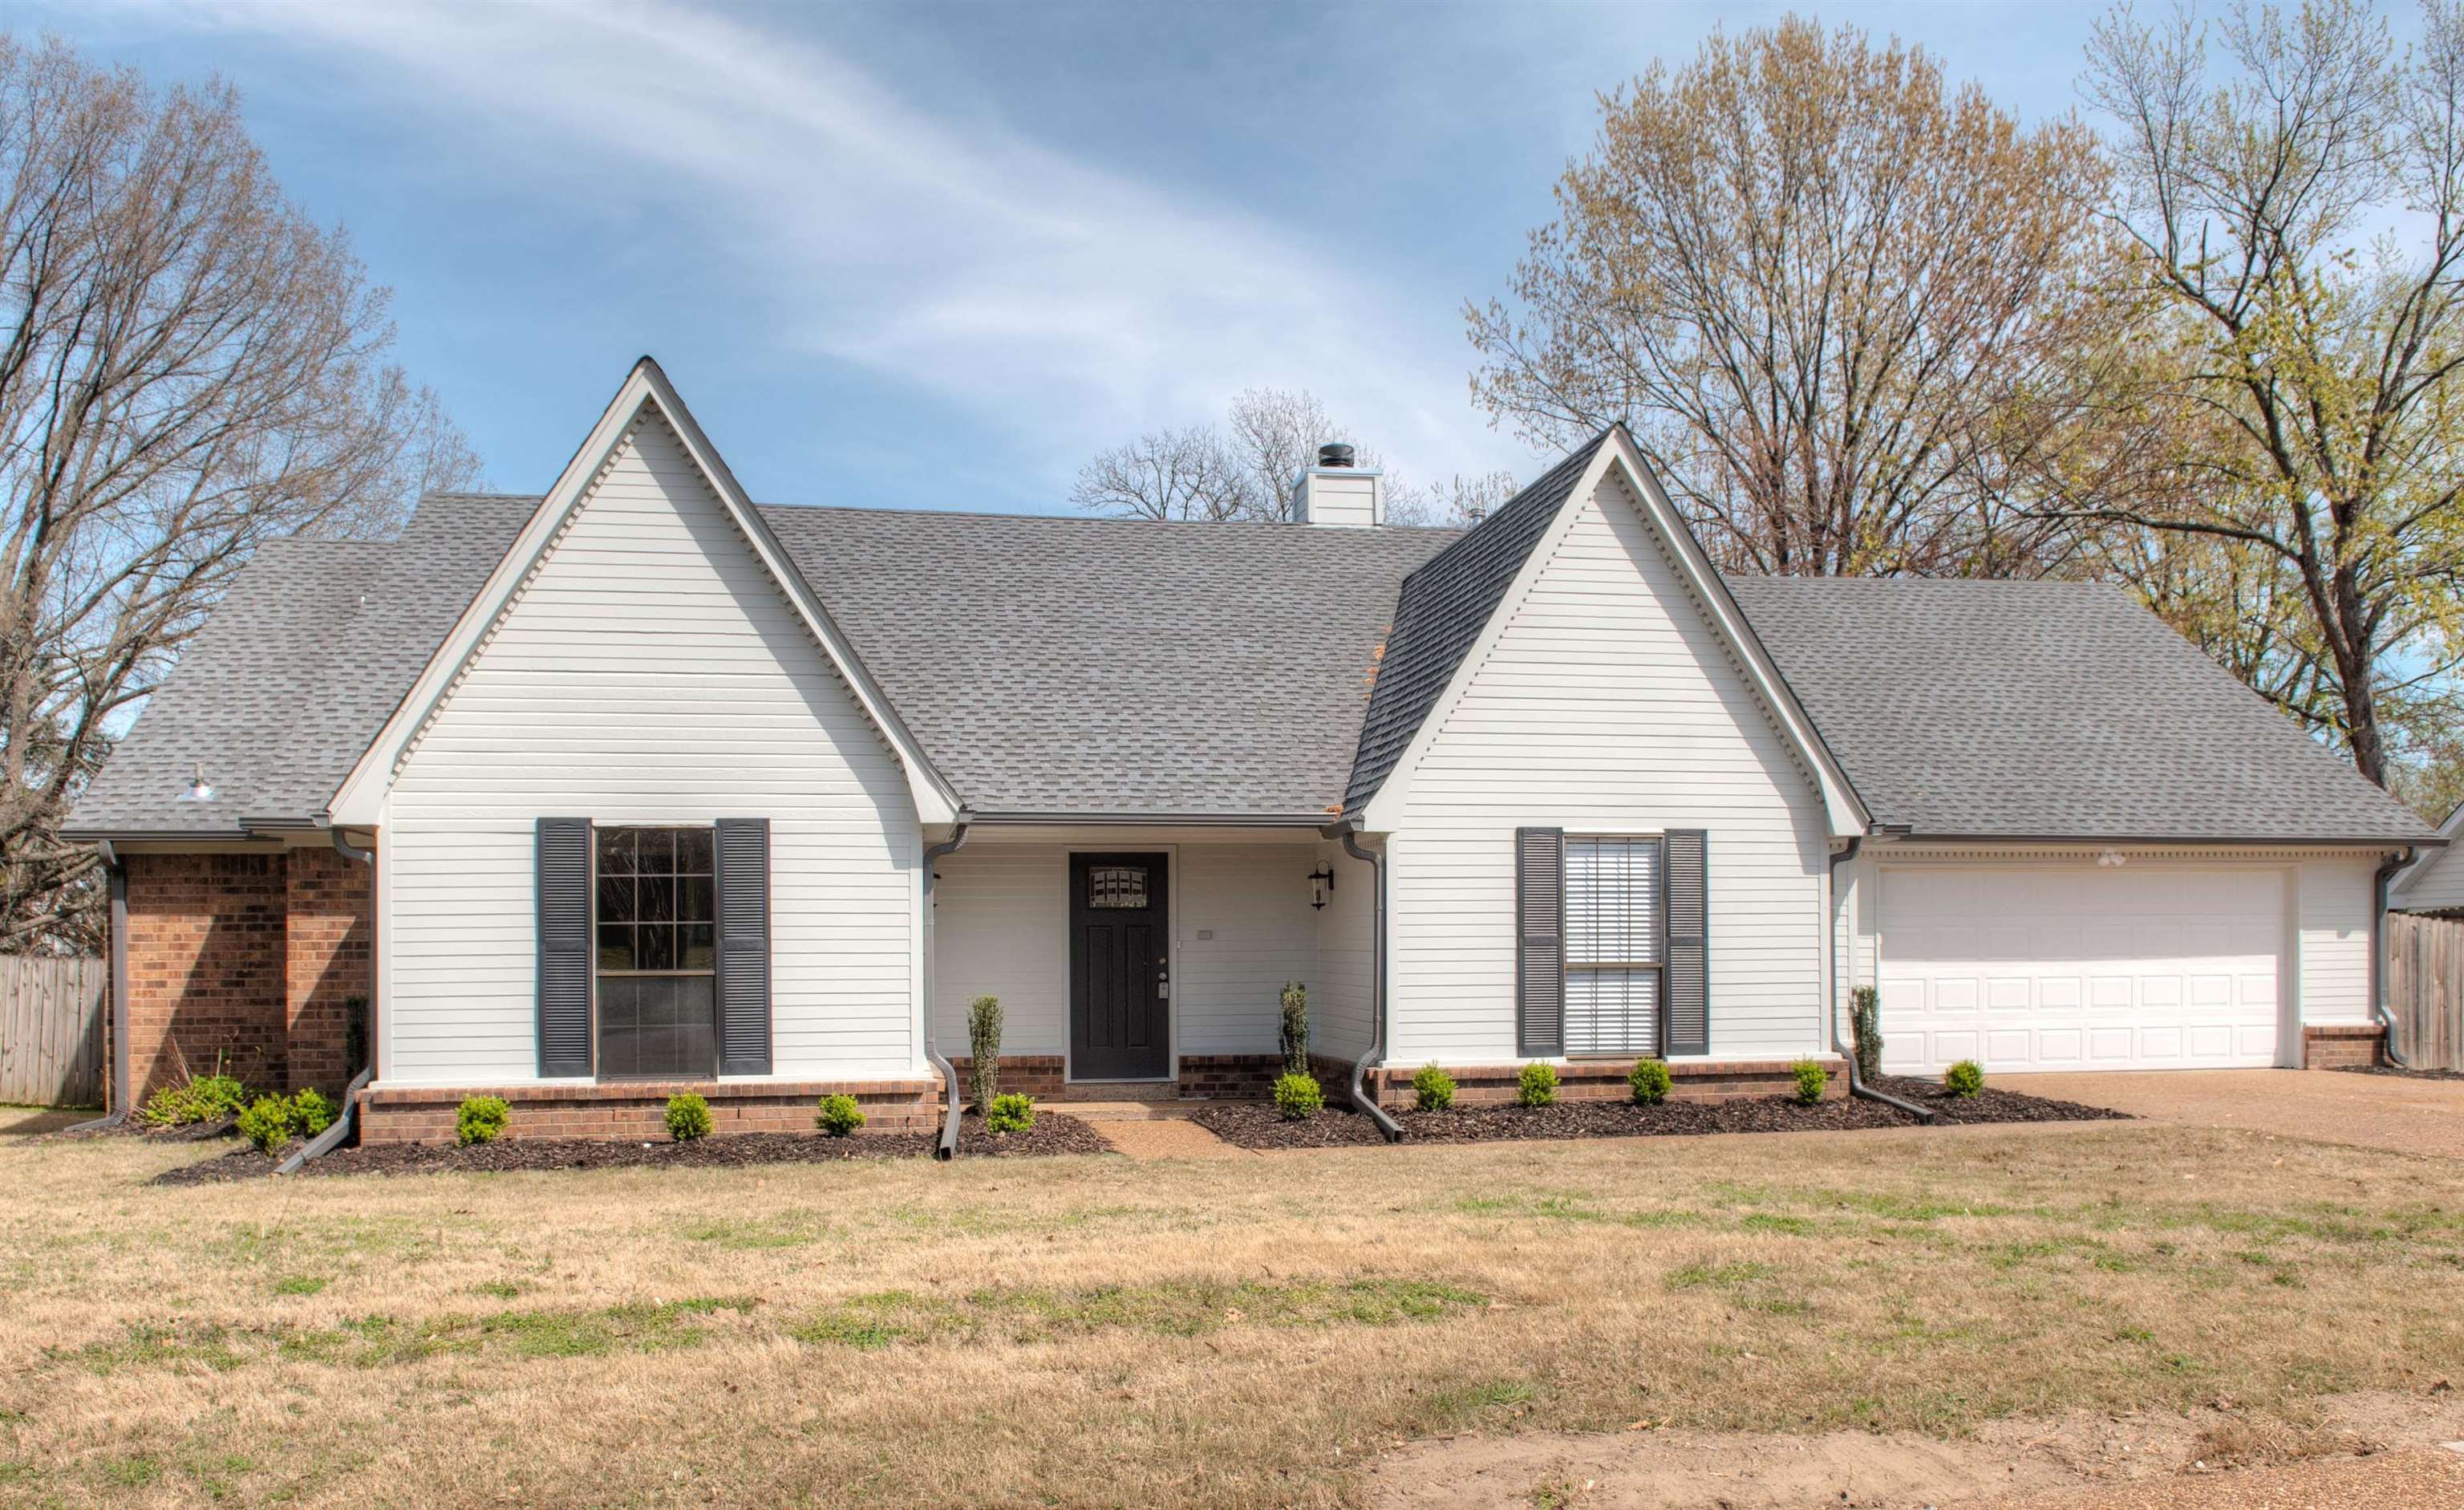 Updated/Renovated! Open floor plan! Move-In Condition! Split Bedroom plan. New Roof! New Paint! New Flooring! New HVAC! New Water Heater! Updated Kitchen & Baths! New Smooth Ceilings! New Custom Deck! Move-In READY!